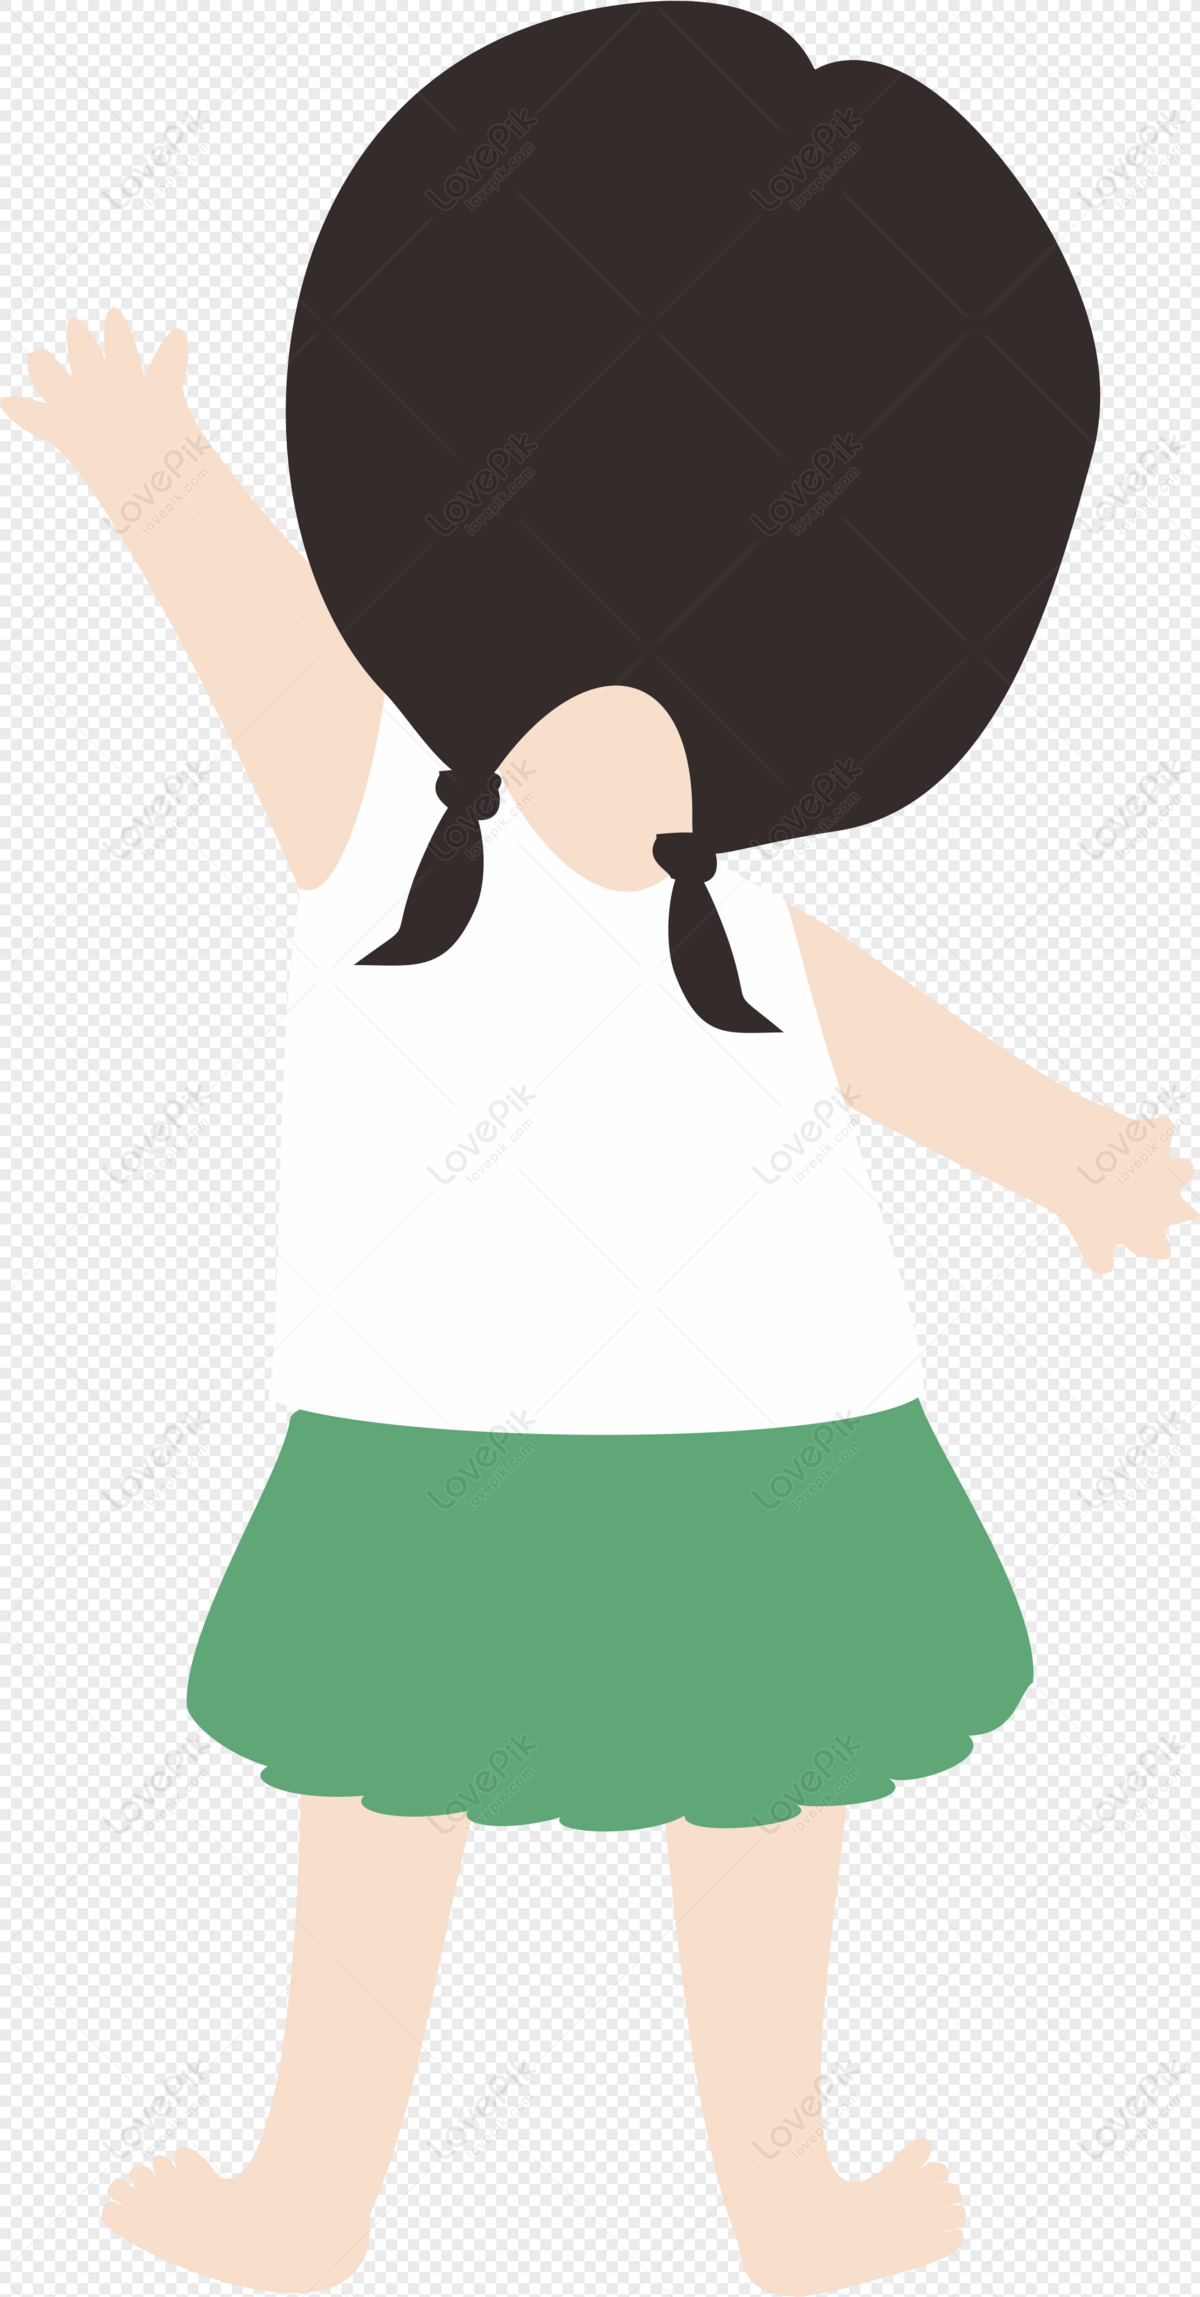 Girls Back, Brown Girl, Girl Vector, Brown Dark PNG Hd Transparent Image  And Clipart Image For Free Download - Lovepik